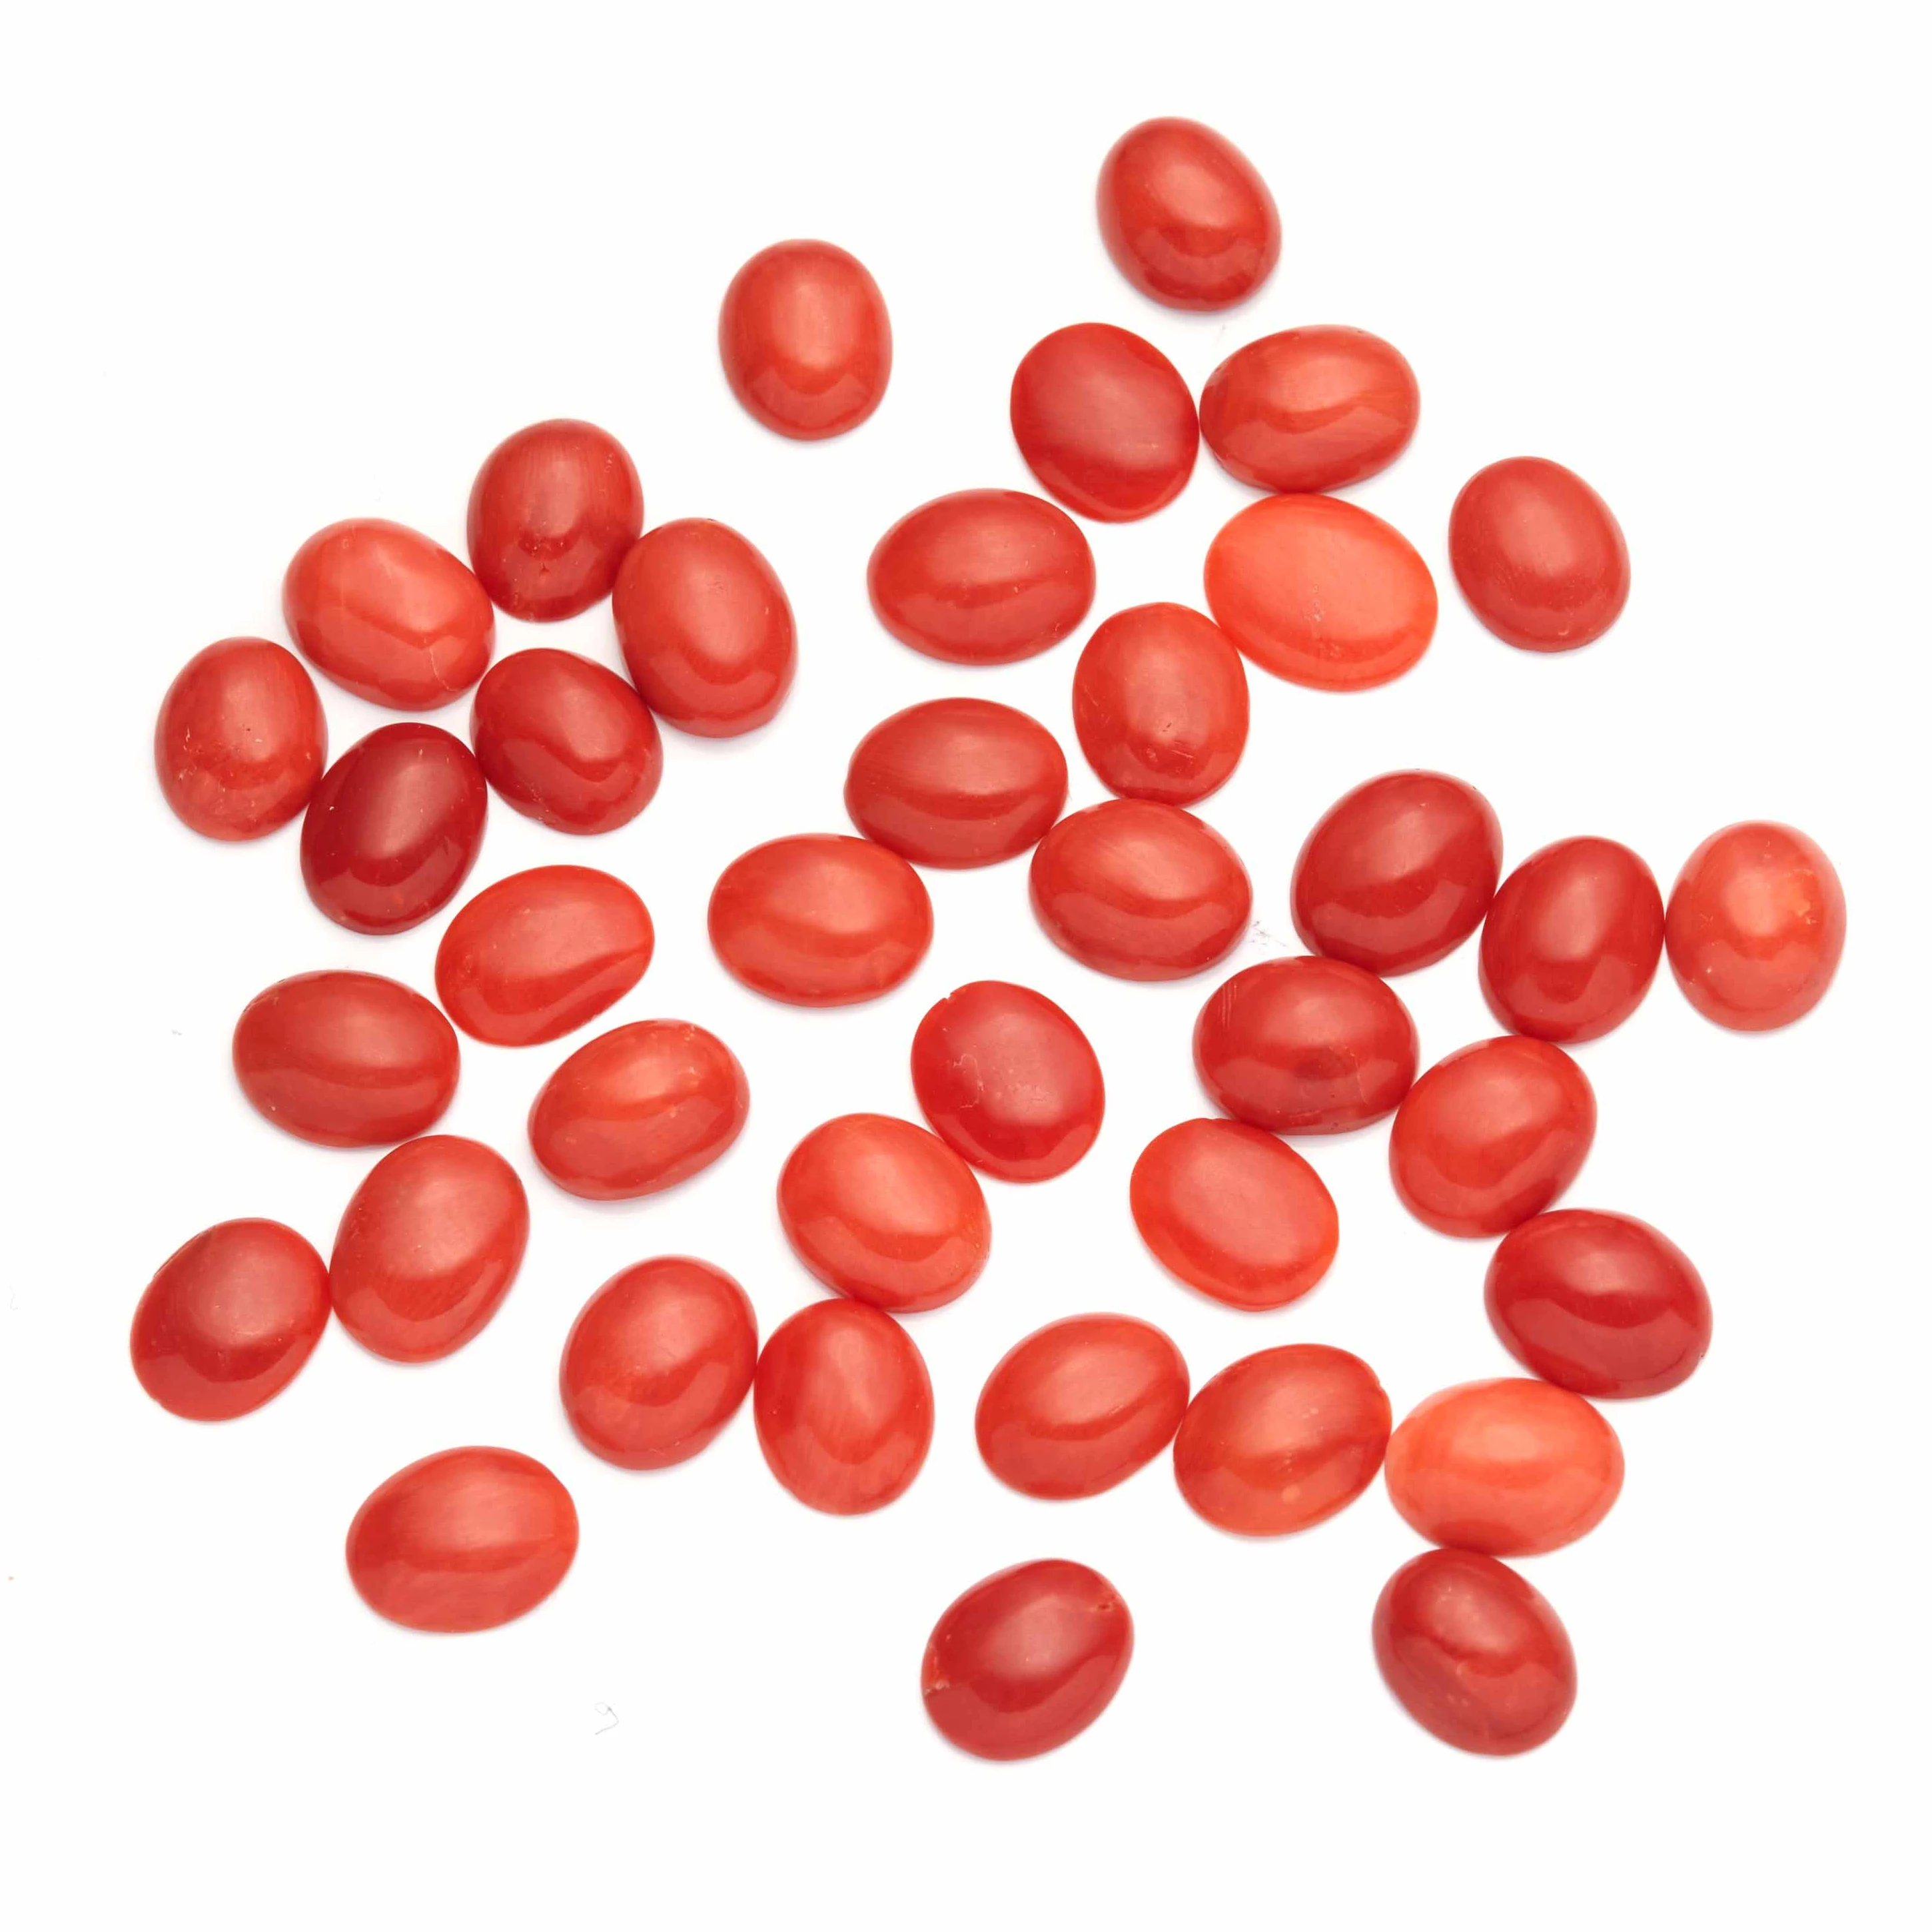 Natural Italian Red Coral 6x4mm Oval Cabochon Loose Gemstone Lot